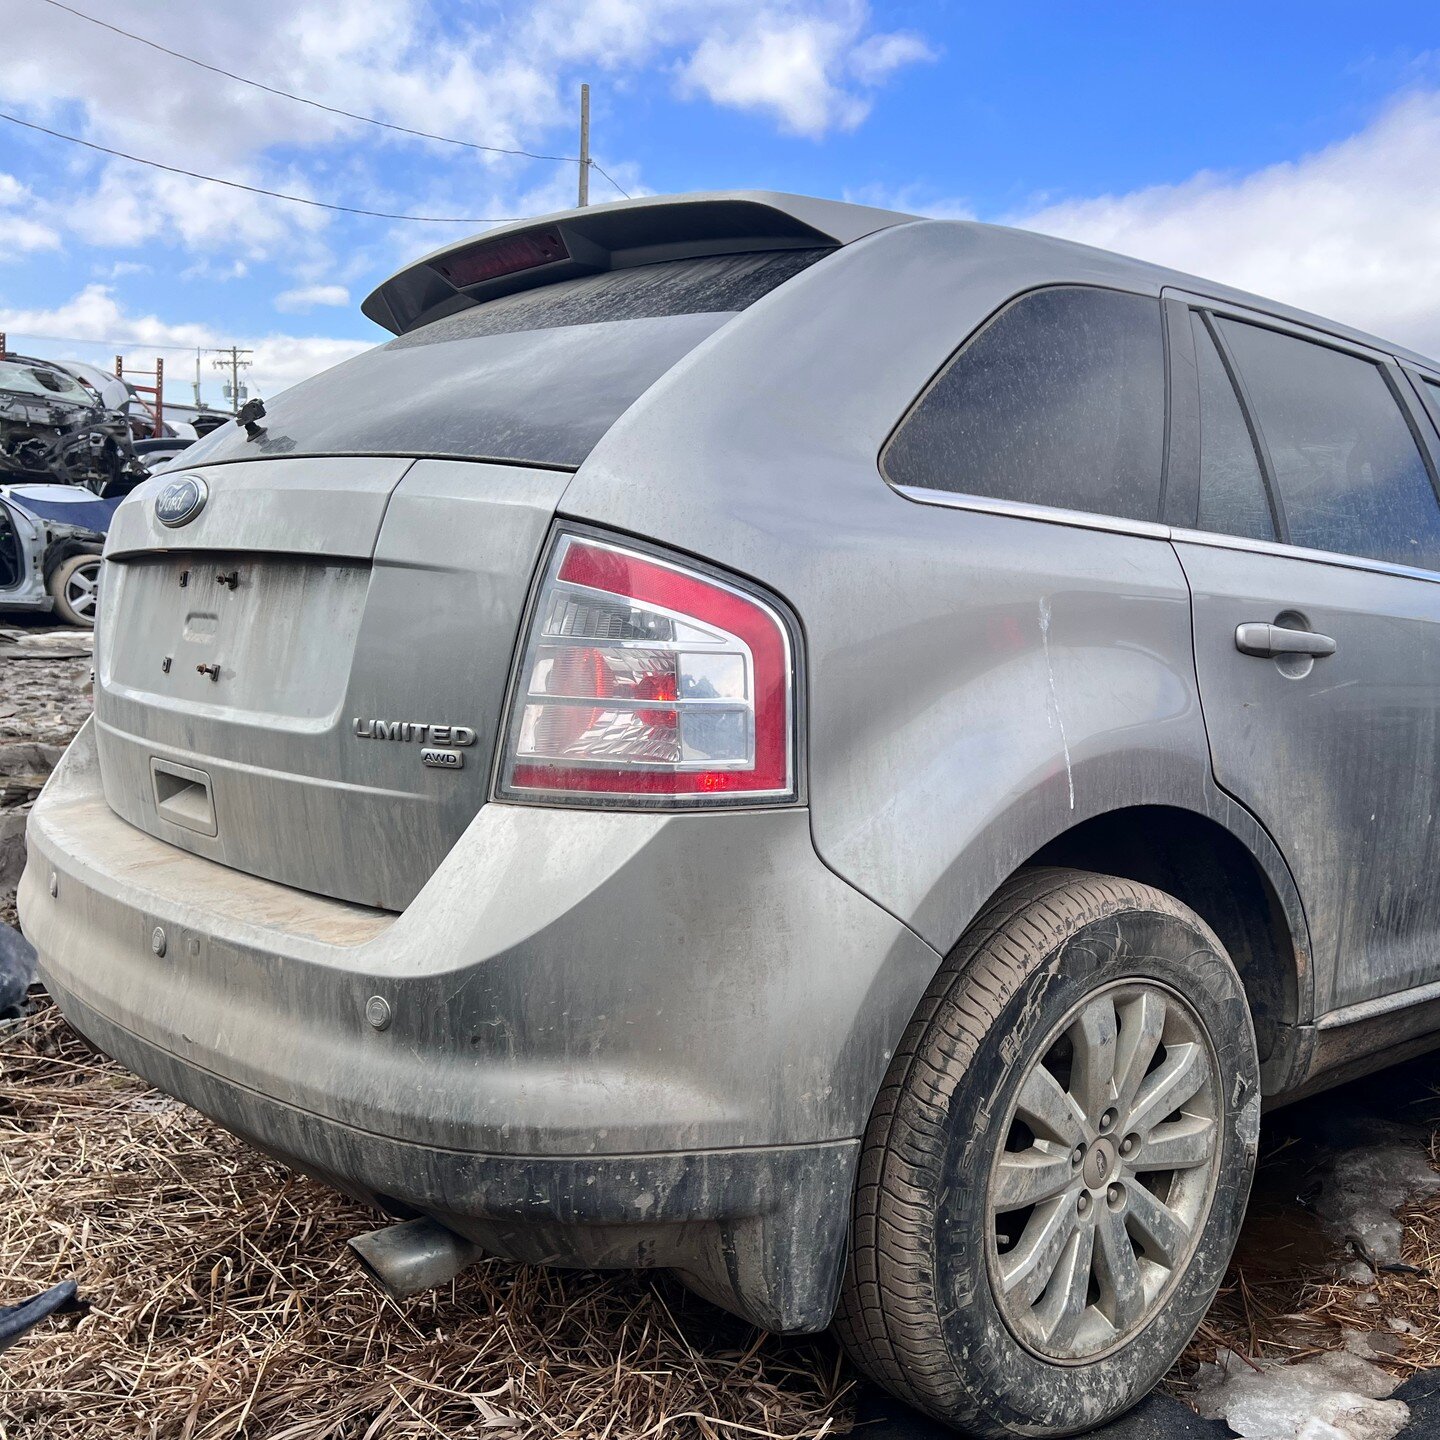 2008 FORD EDGE LIMITED 3.5L *FOR PARTS* - 4WD, 6 SPEED AUTOMATIC TRANSMISSION, 6 CYCLINDER , GREY, KMS:258191, VIN:2FMDK49CX8BB43219

We offer contactless delivery and are more than willing to accommodate your needs.
Why pick your part when we pull i